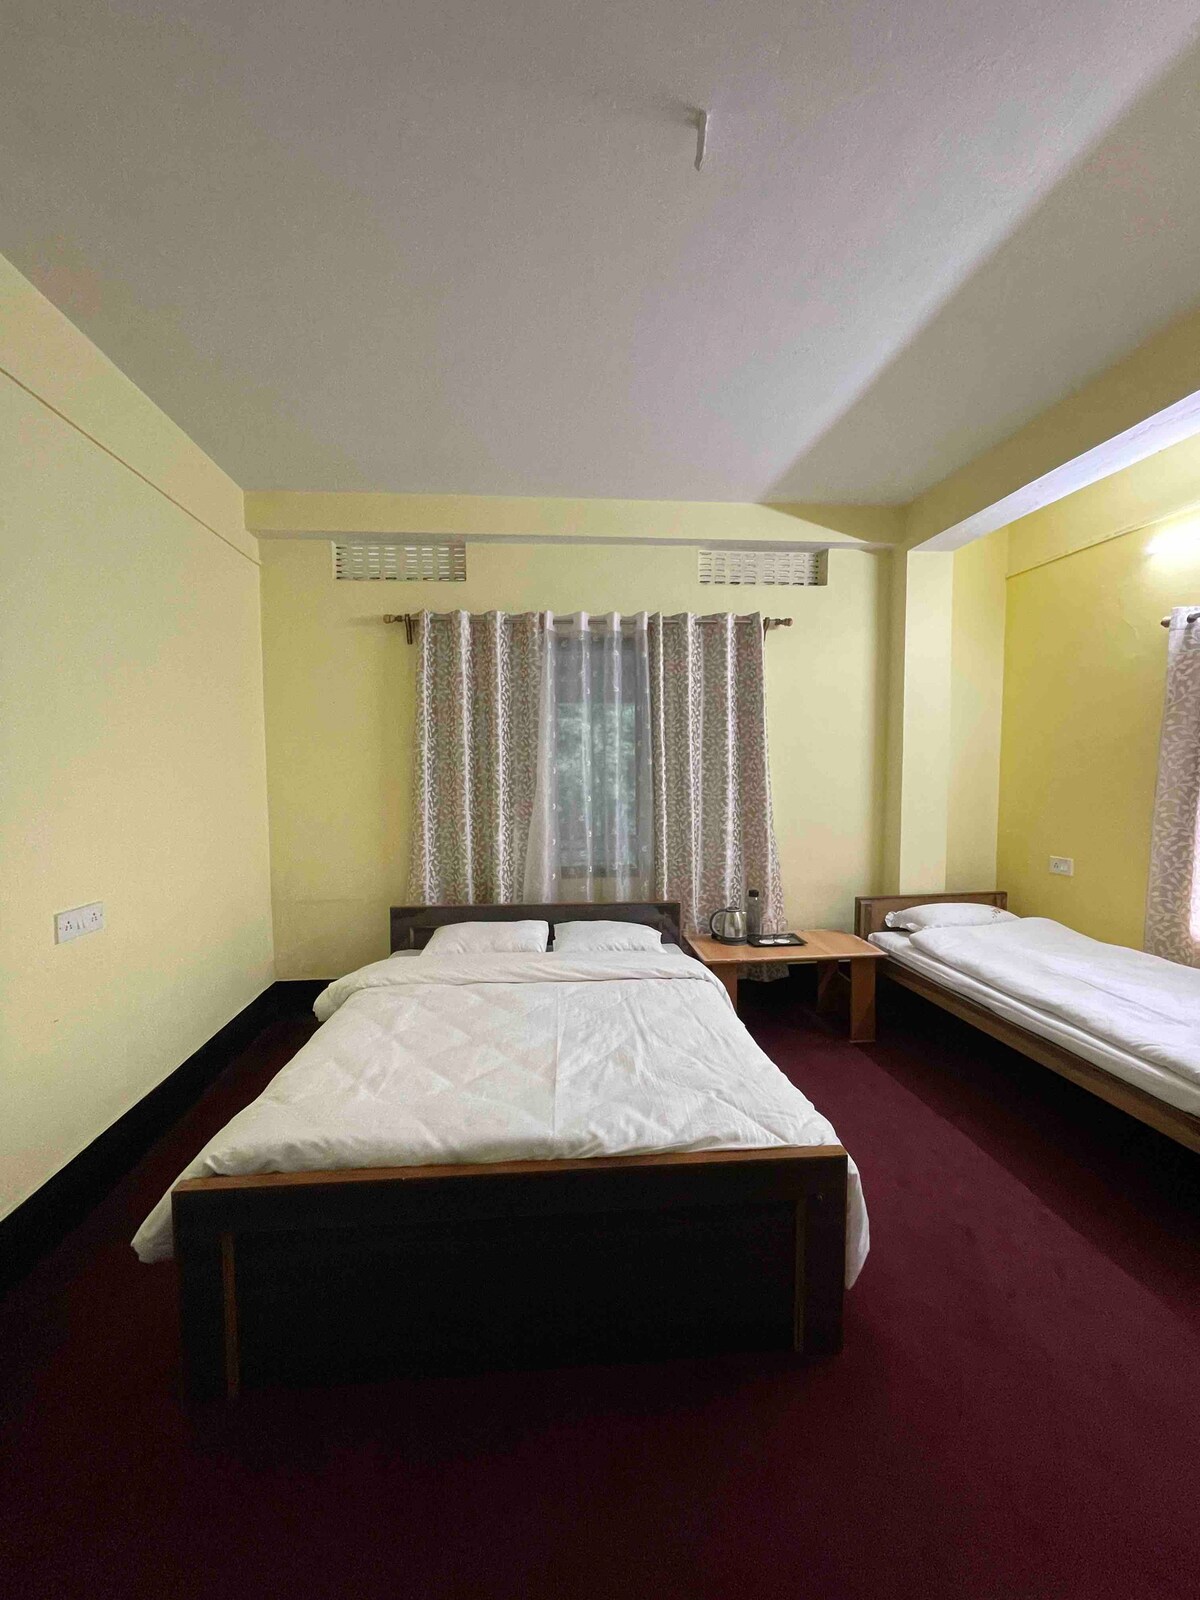 A triple bedroom with 1 double and 1 single bed.